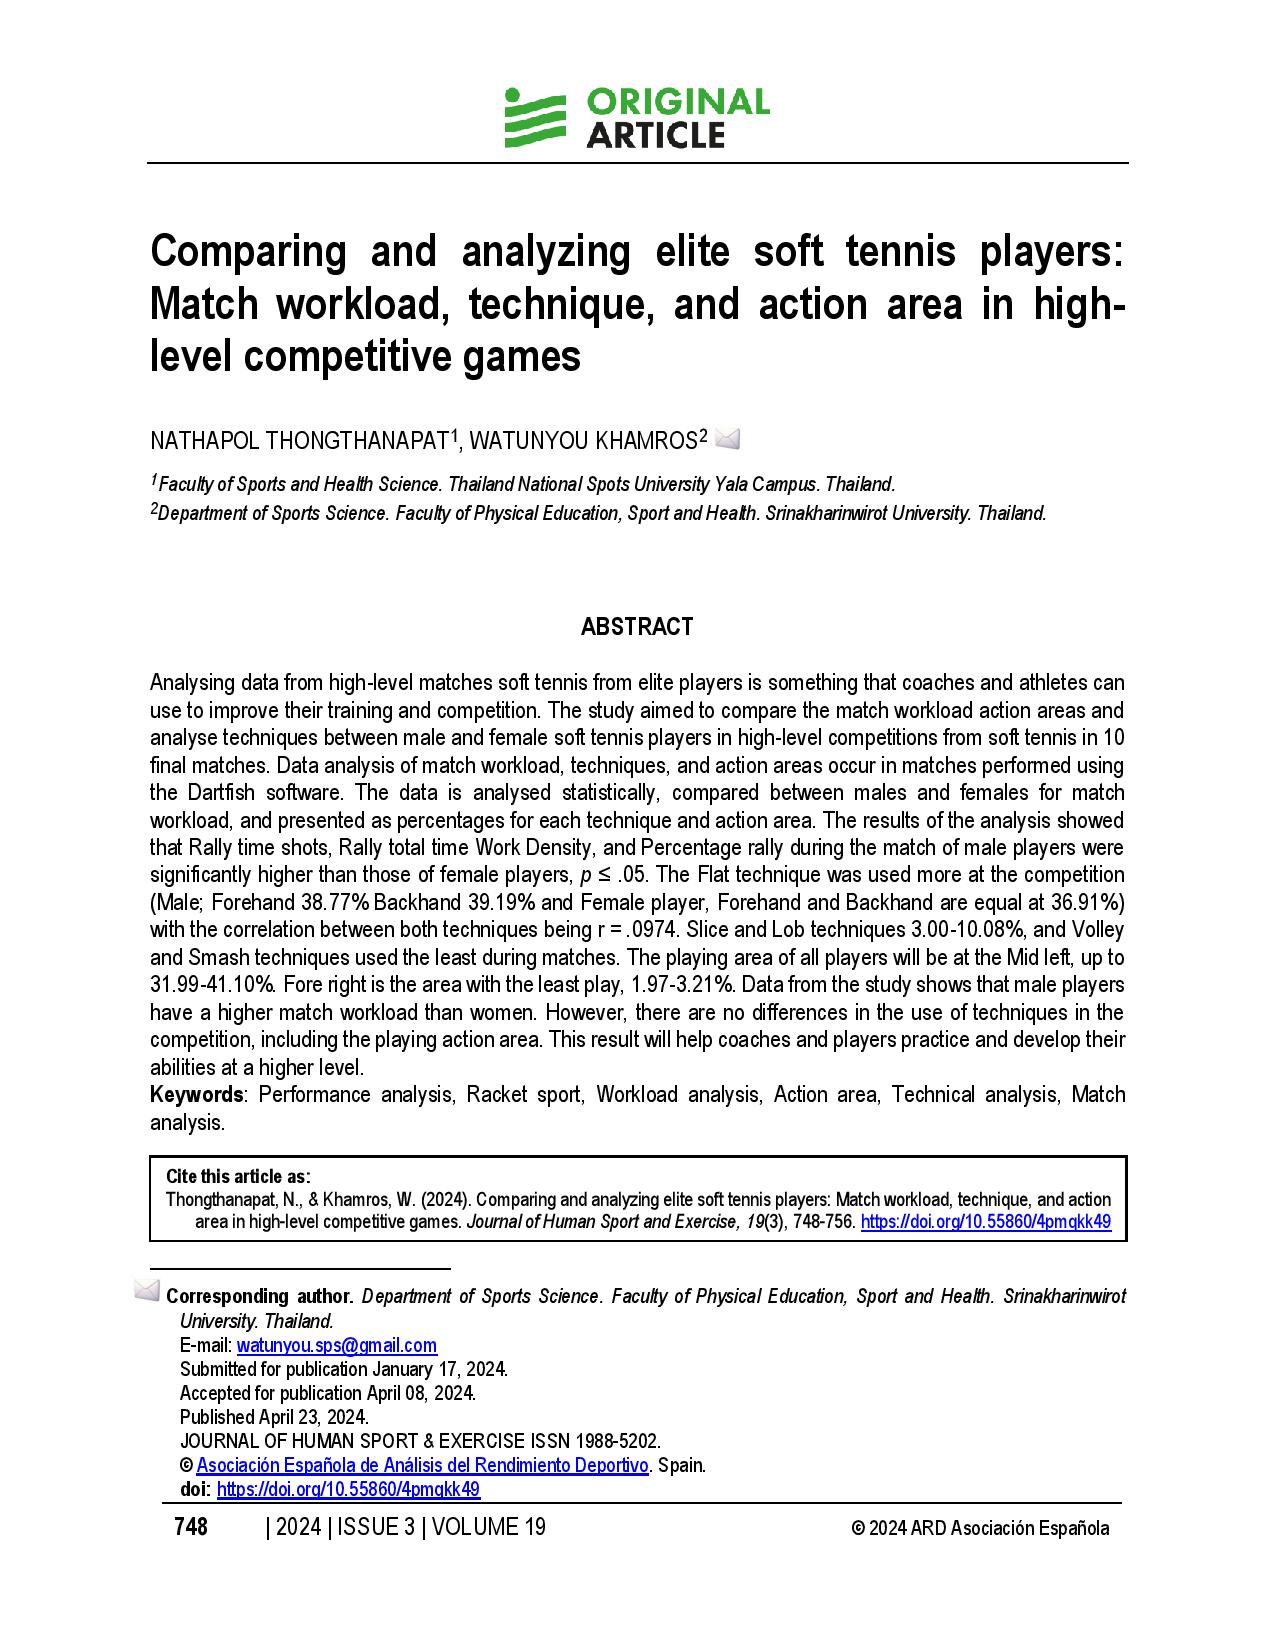 Comparing and analyzing elite soft tennis players: Match workload, technique, and action area in high-level competitive games